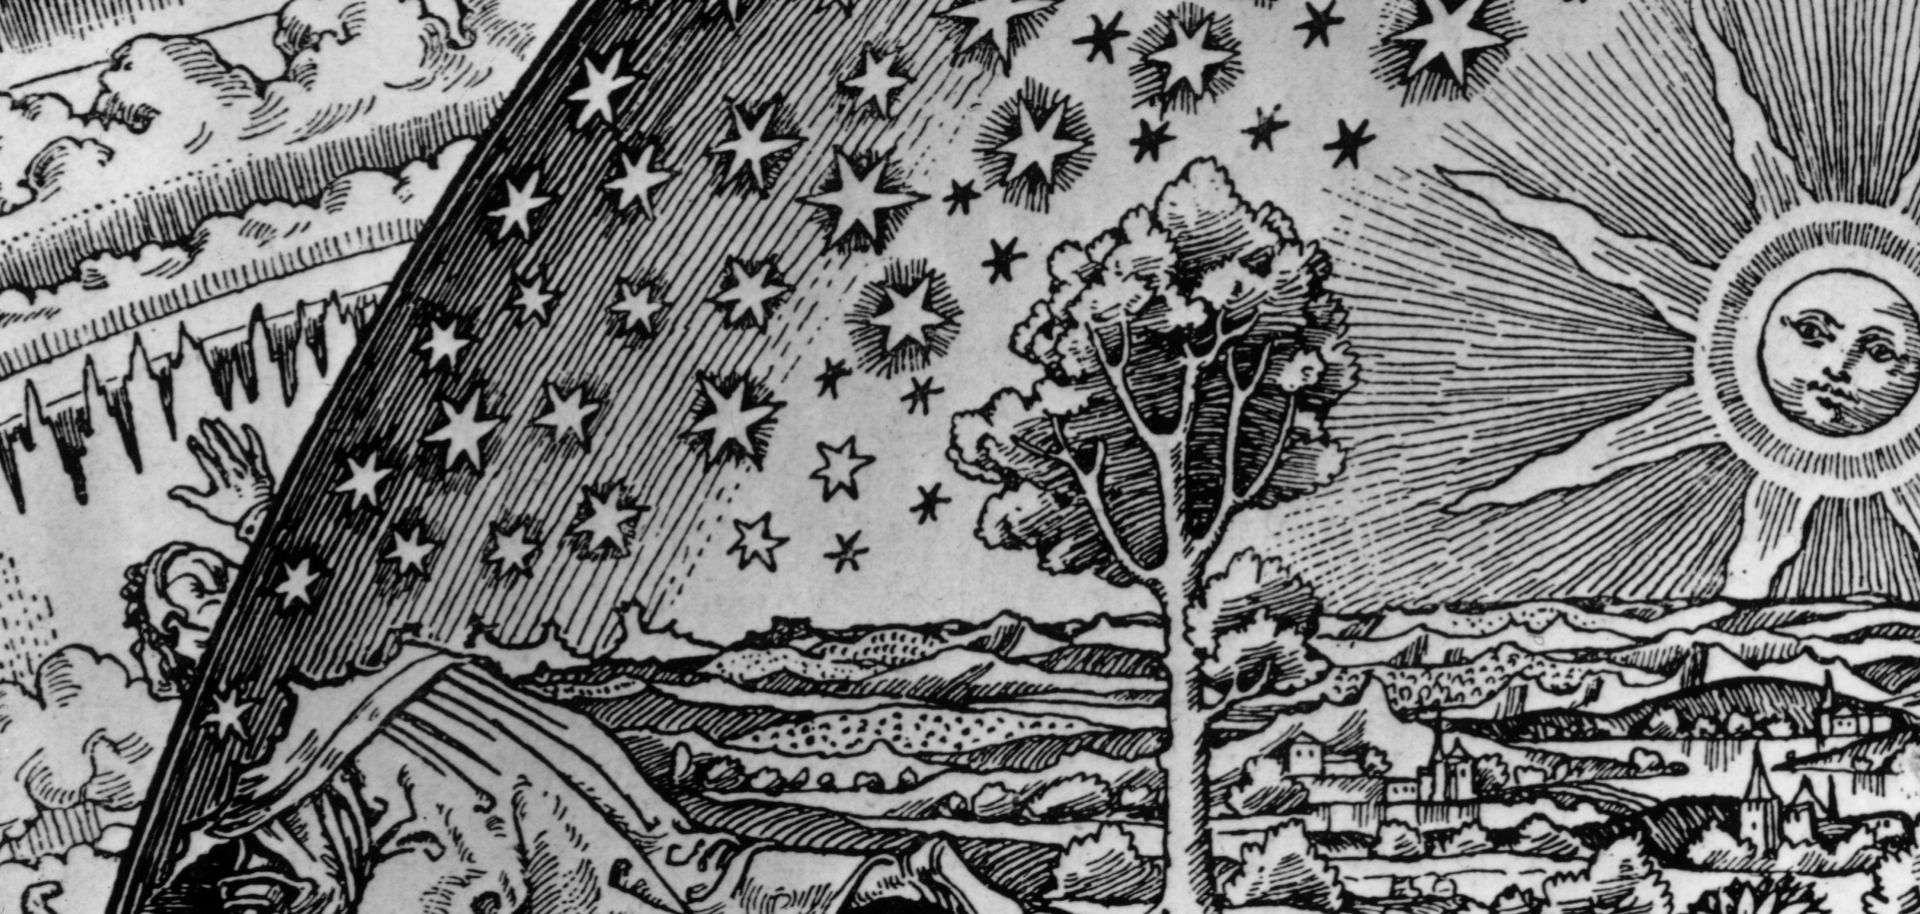 An illustration from a sixteenth-century German book on the cosmos depicts an old man penetrating the earth's firmament to see the workings of the universe beyond, circa 1550.